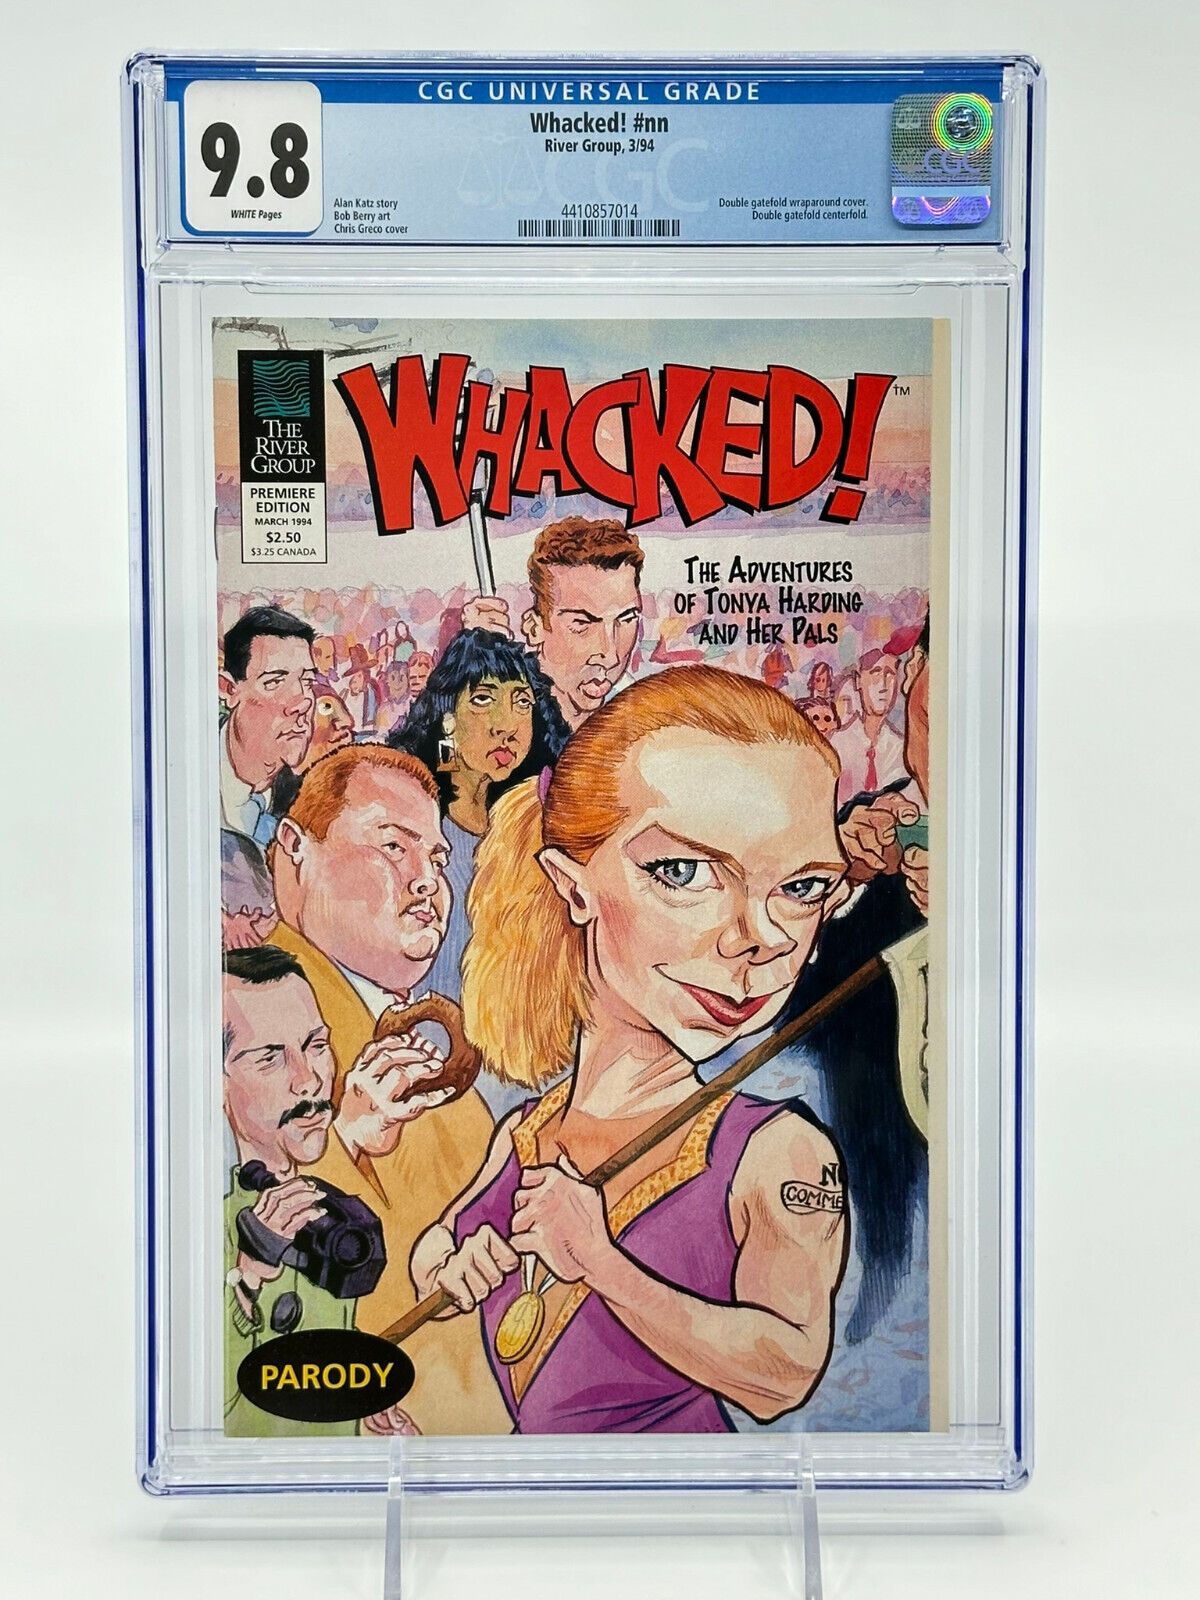 Whacked The Adventures of Tonya Harding & Her Pals #nn CGC 9.8 River Group 1994